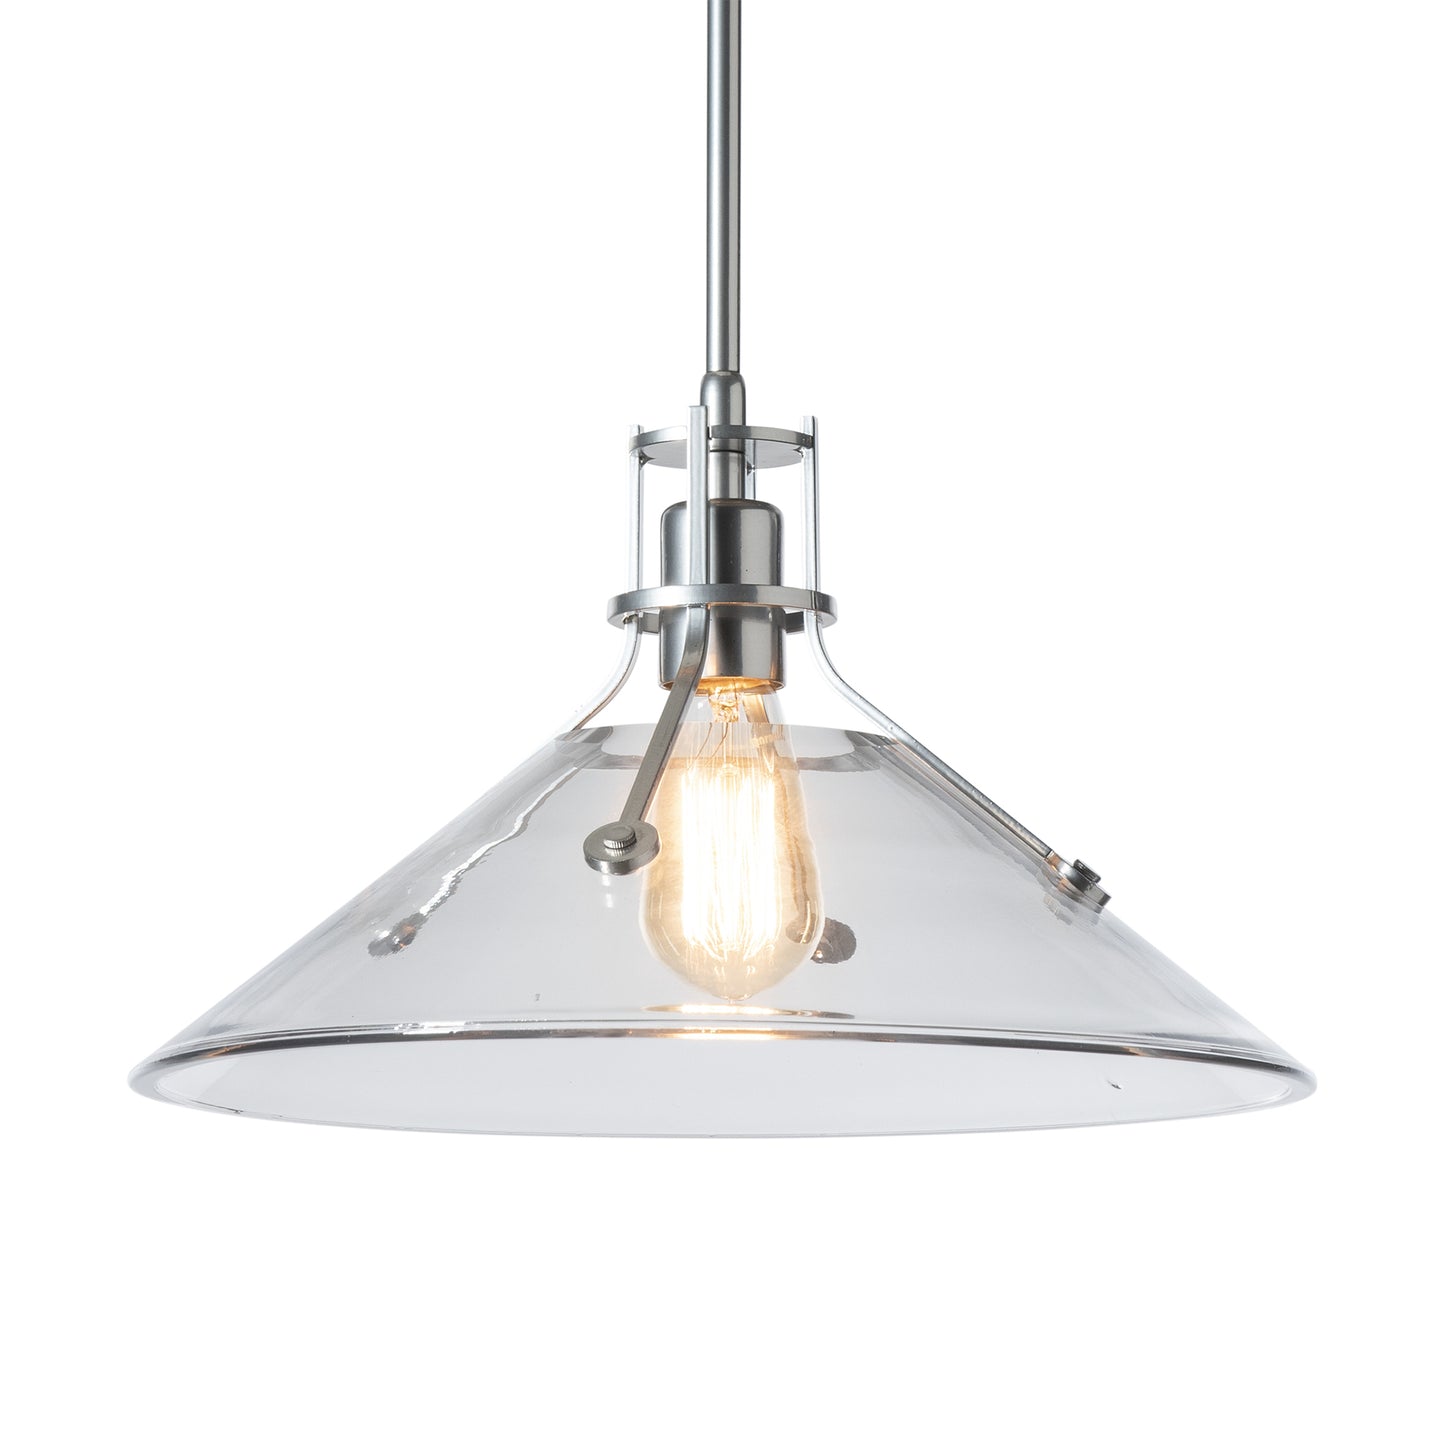 A Henry Medium Glass Shade Pendant by Hubbardton Forge, a modern industrial pendant light with a clear glass shade.